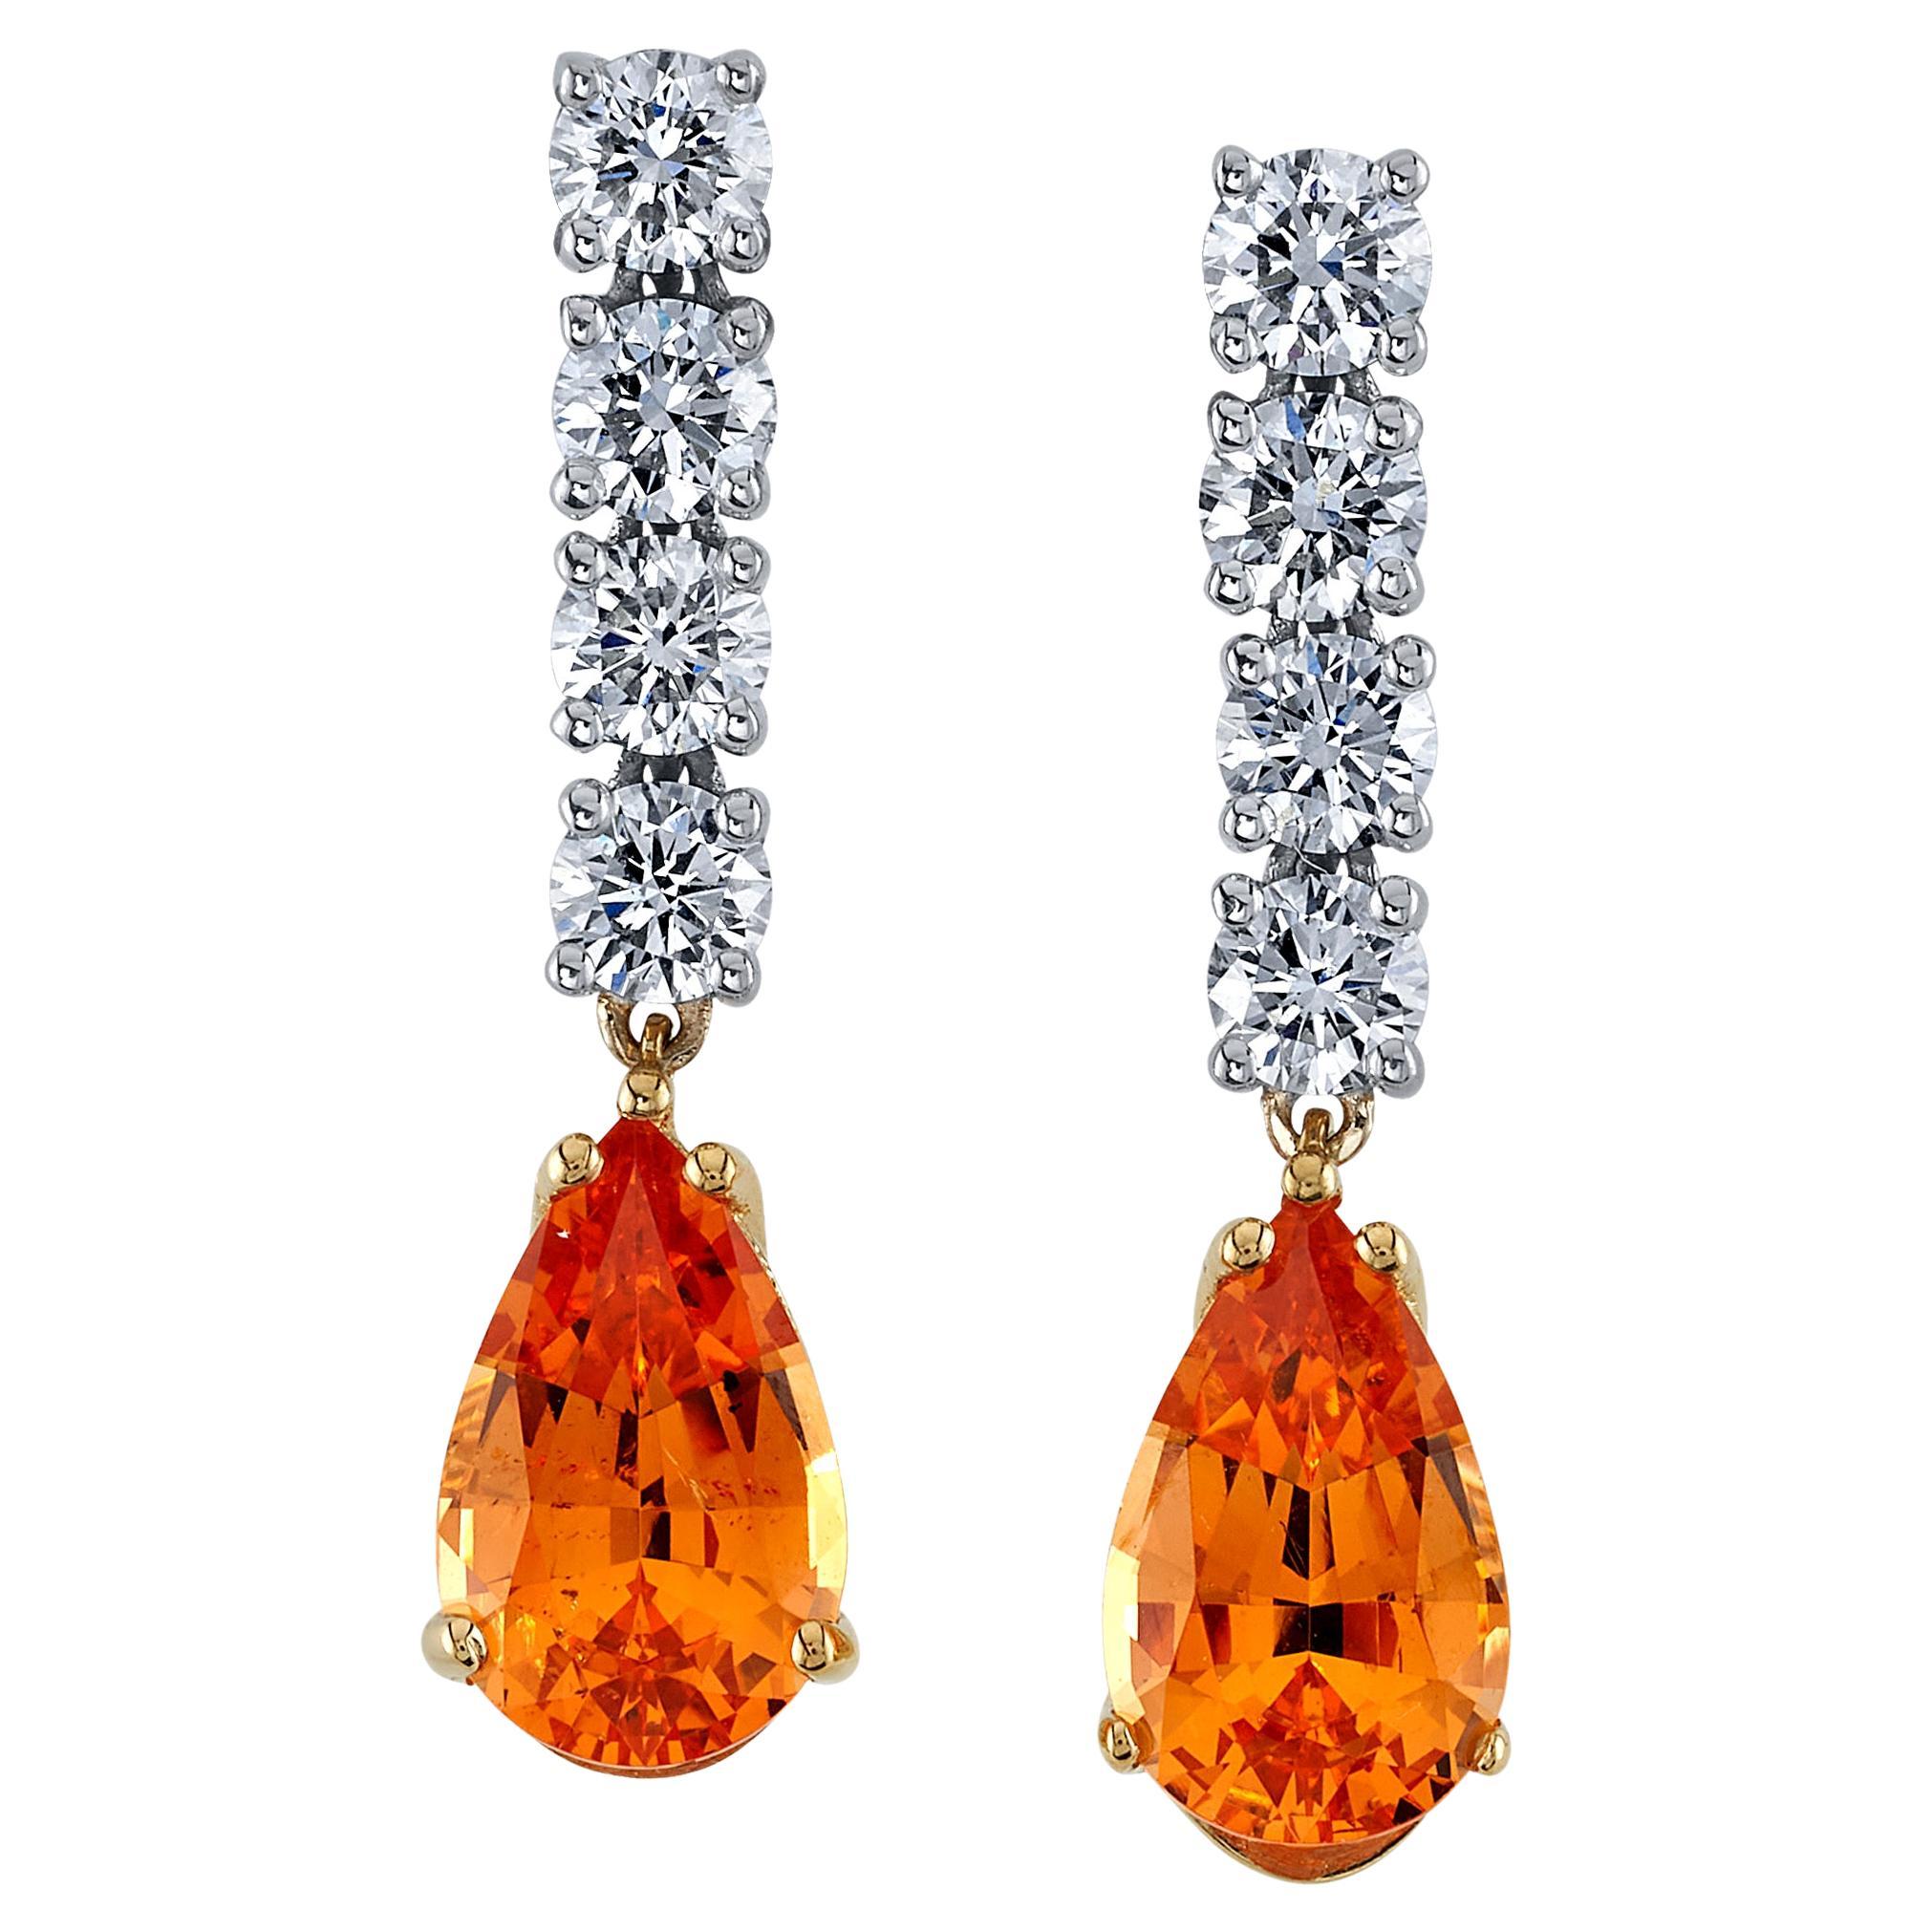 African Spessartite Garnet and Diamond Dangle Earrings in White and Yellow Gold 